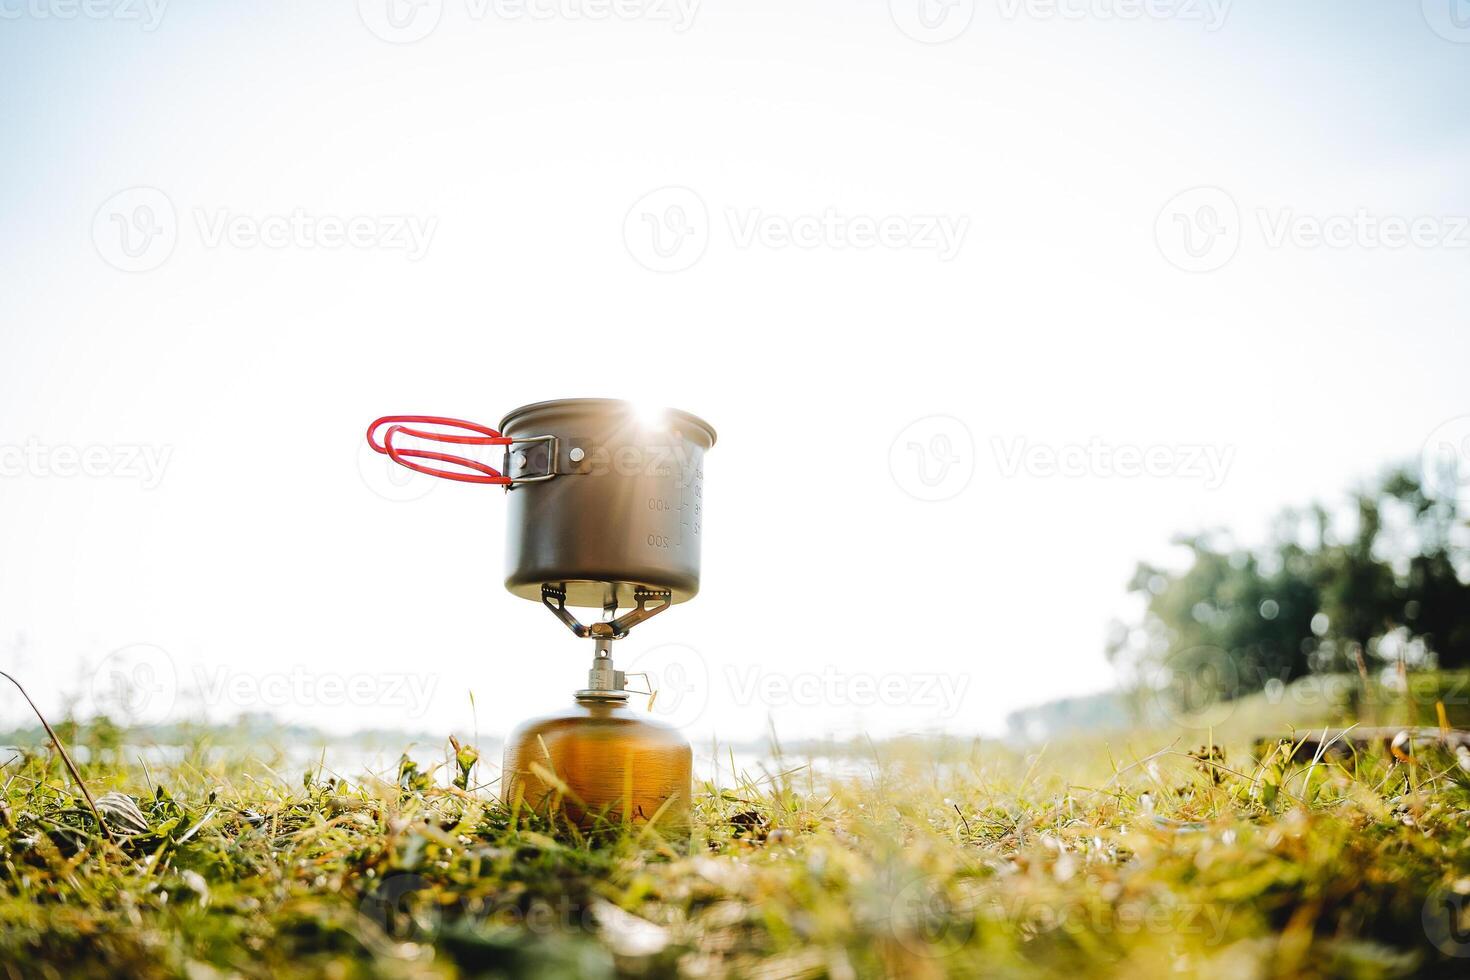 Tourist dishes stand on the grass against the background of sunset in the rays of sunlight, the pot stands on a gas burner, trekking in the forest, compact equipment for hiking, glare photo